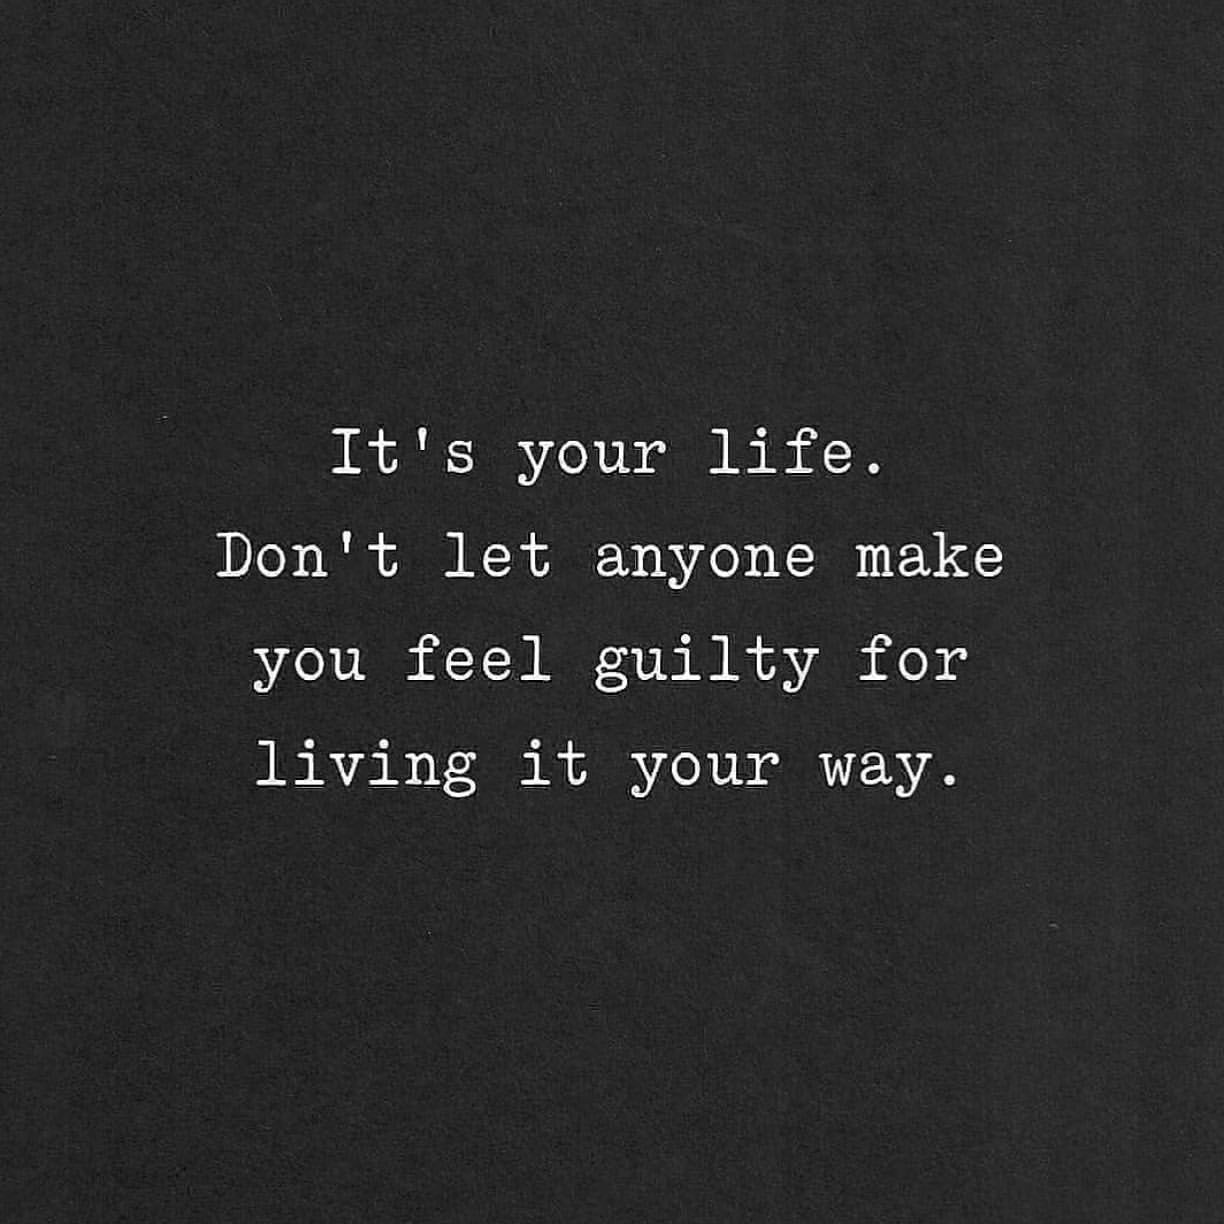 It's your life. Don't let anyone make you feel guilty for living it your way.